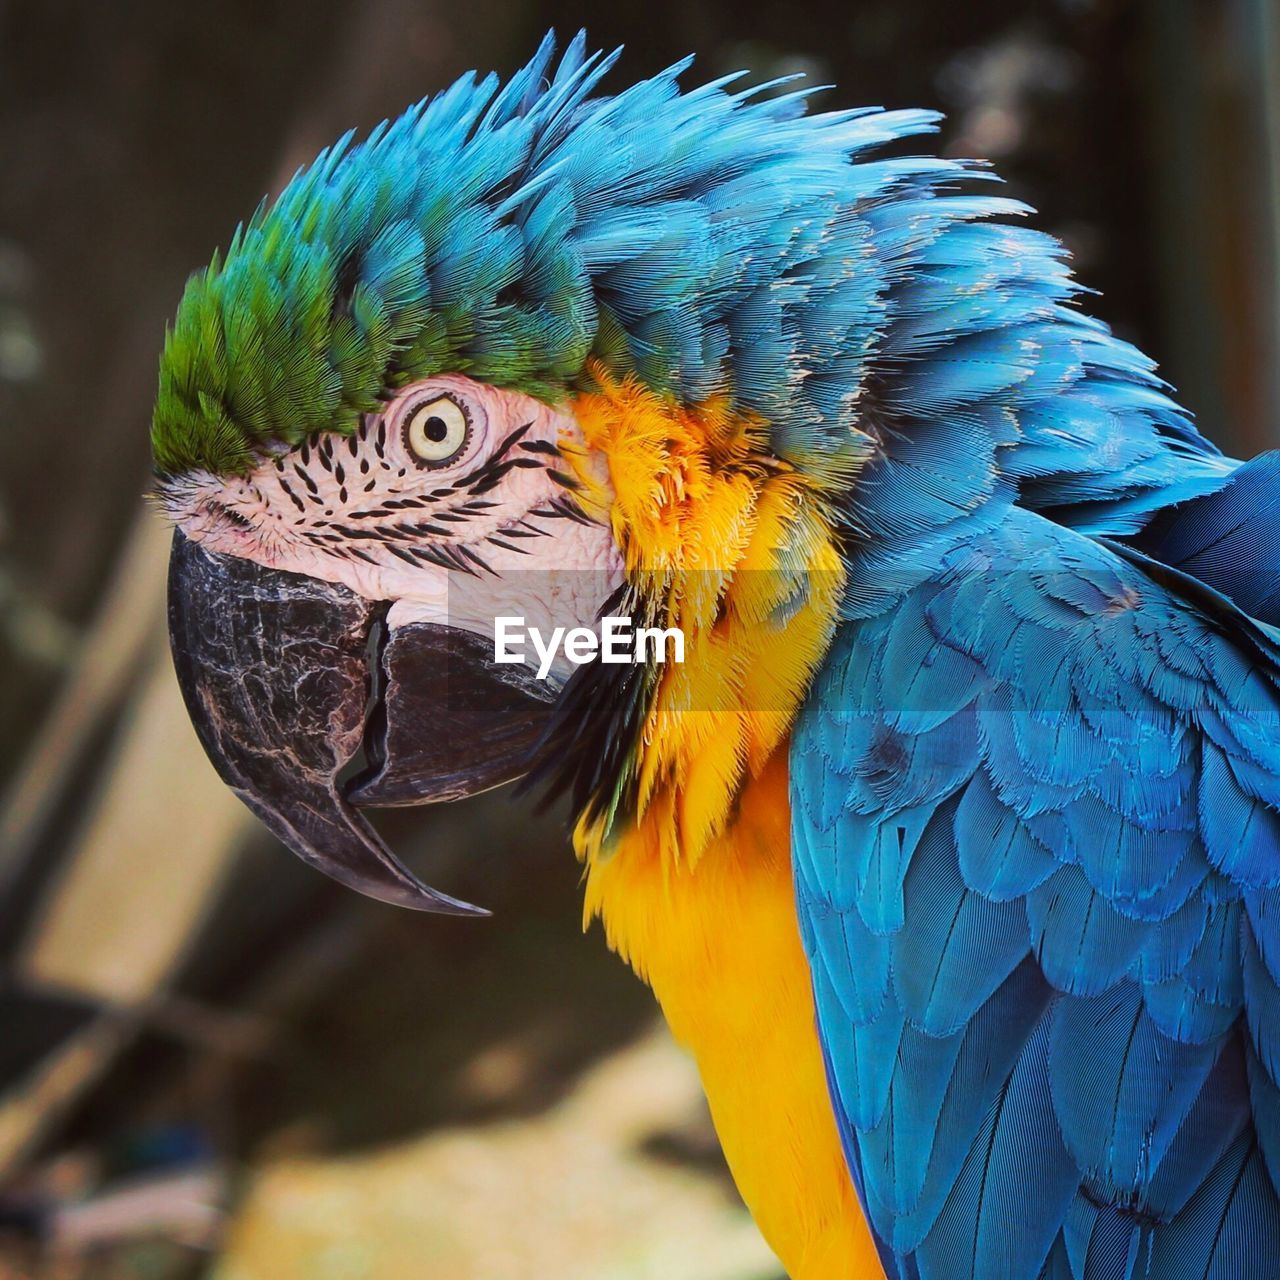 CLOSE-UP OF A PARROT ON BLUE